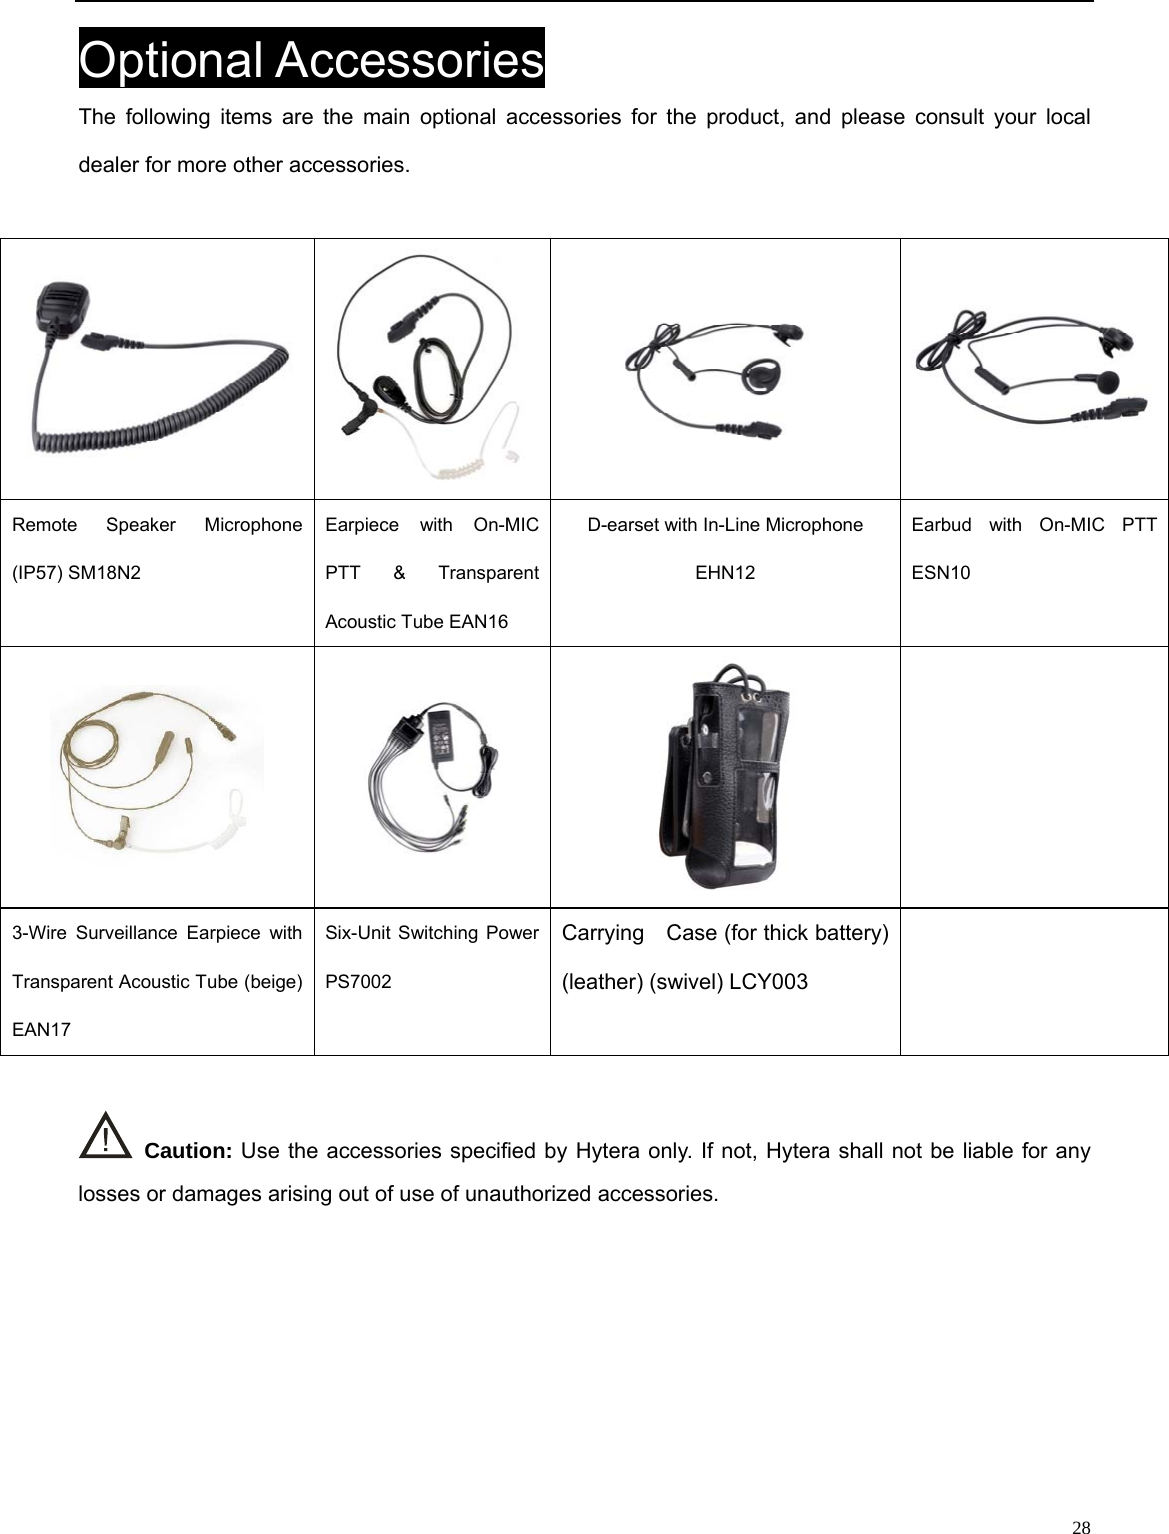                                                                                                            Optional Accessories The following items are the main optional accessories for the product, and please consult your local dealer for more other accessories.   Remote Speaker Microphone (IP57) SM18N2   Earpiece with On-MIC PTT &amp; Transparent Acoustic Tube EAN16   D-earset with In-Line Microphone EHN12 Earbud with On-MIC PTT ESN10       Carrying    Case (for thick battery) (leather) (swivel) LCY003 3-Wire Surveillance Earpiece with Transparent Acoustic Tube (beige) EAN17 Six-Unit Switching Power   PS7002    Caution: Use the accessories specified by Hytera only. If not, Hytera shall not be liable for any losses or damages arising out of use of unauthorized accessories.      28